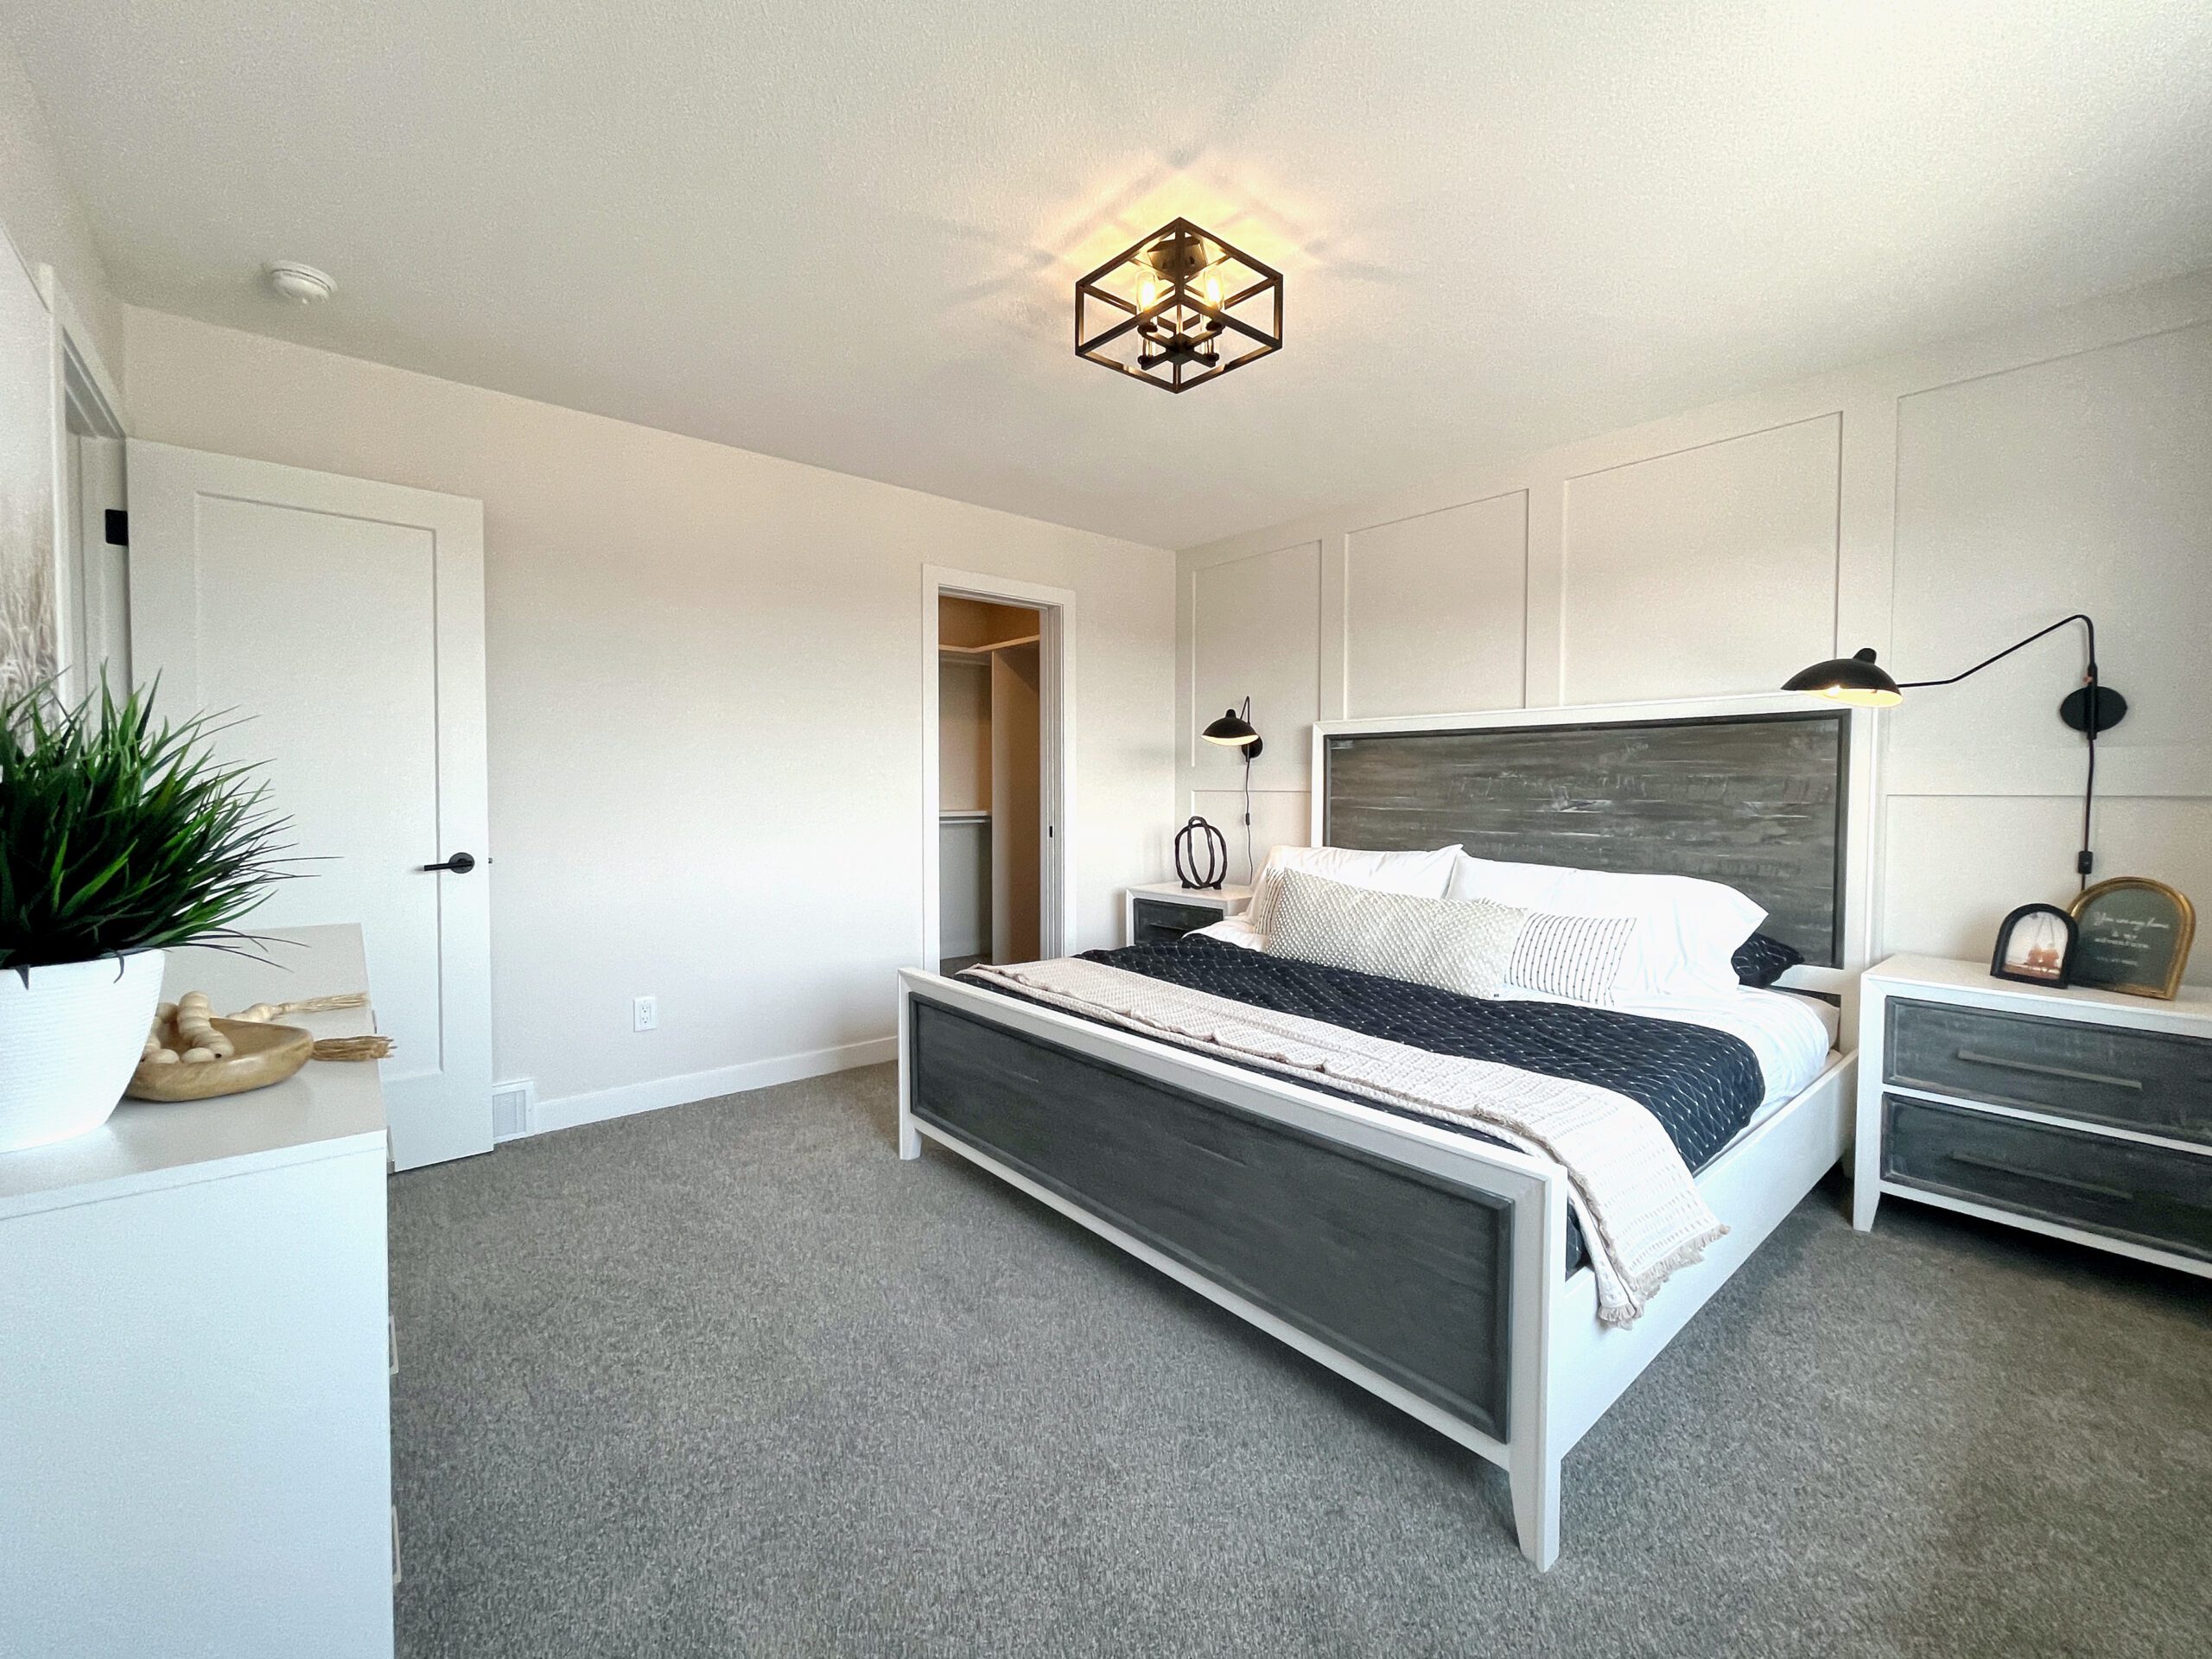 A two-storey home in Pilot Butte with a white bed and gray carpet.